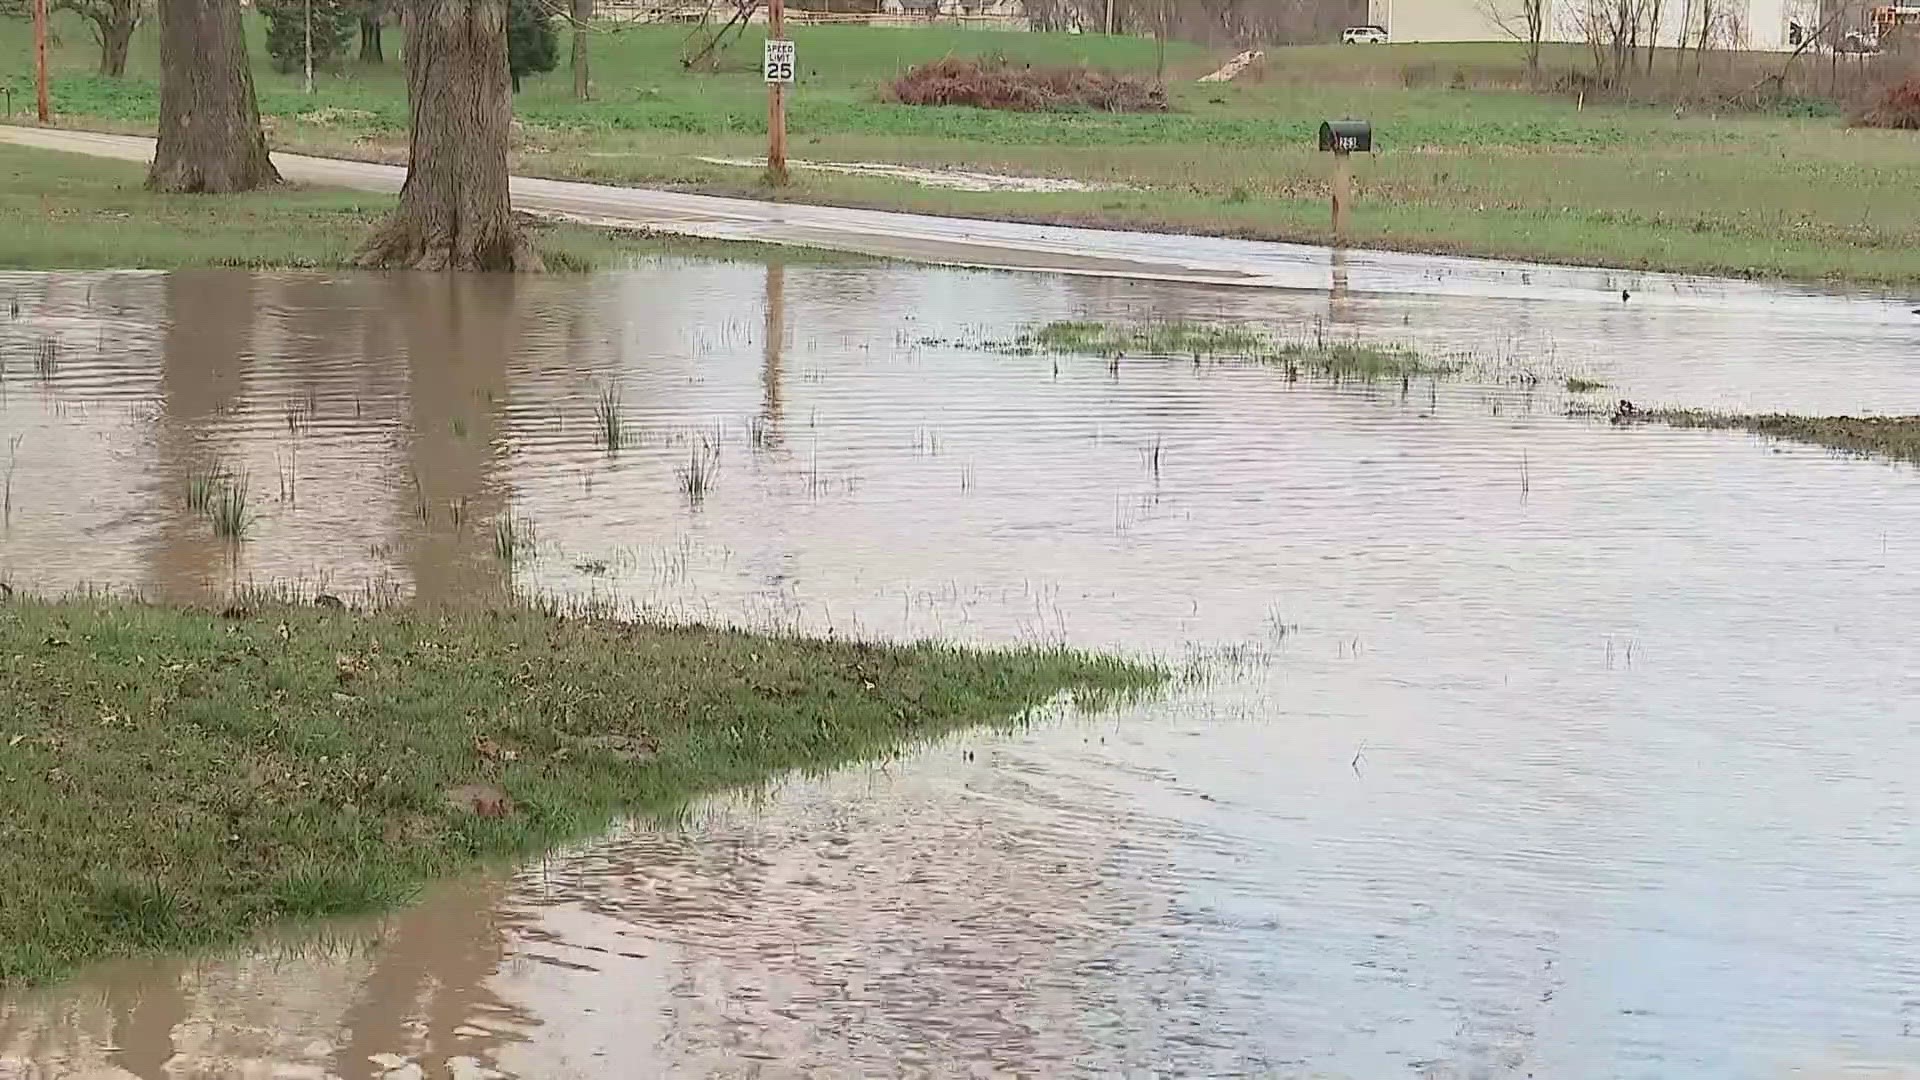 Communities around the state saw water levels rise, causing flooding on roadways and near homes.